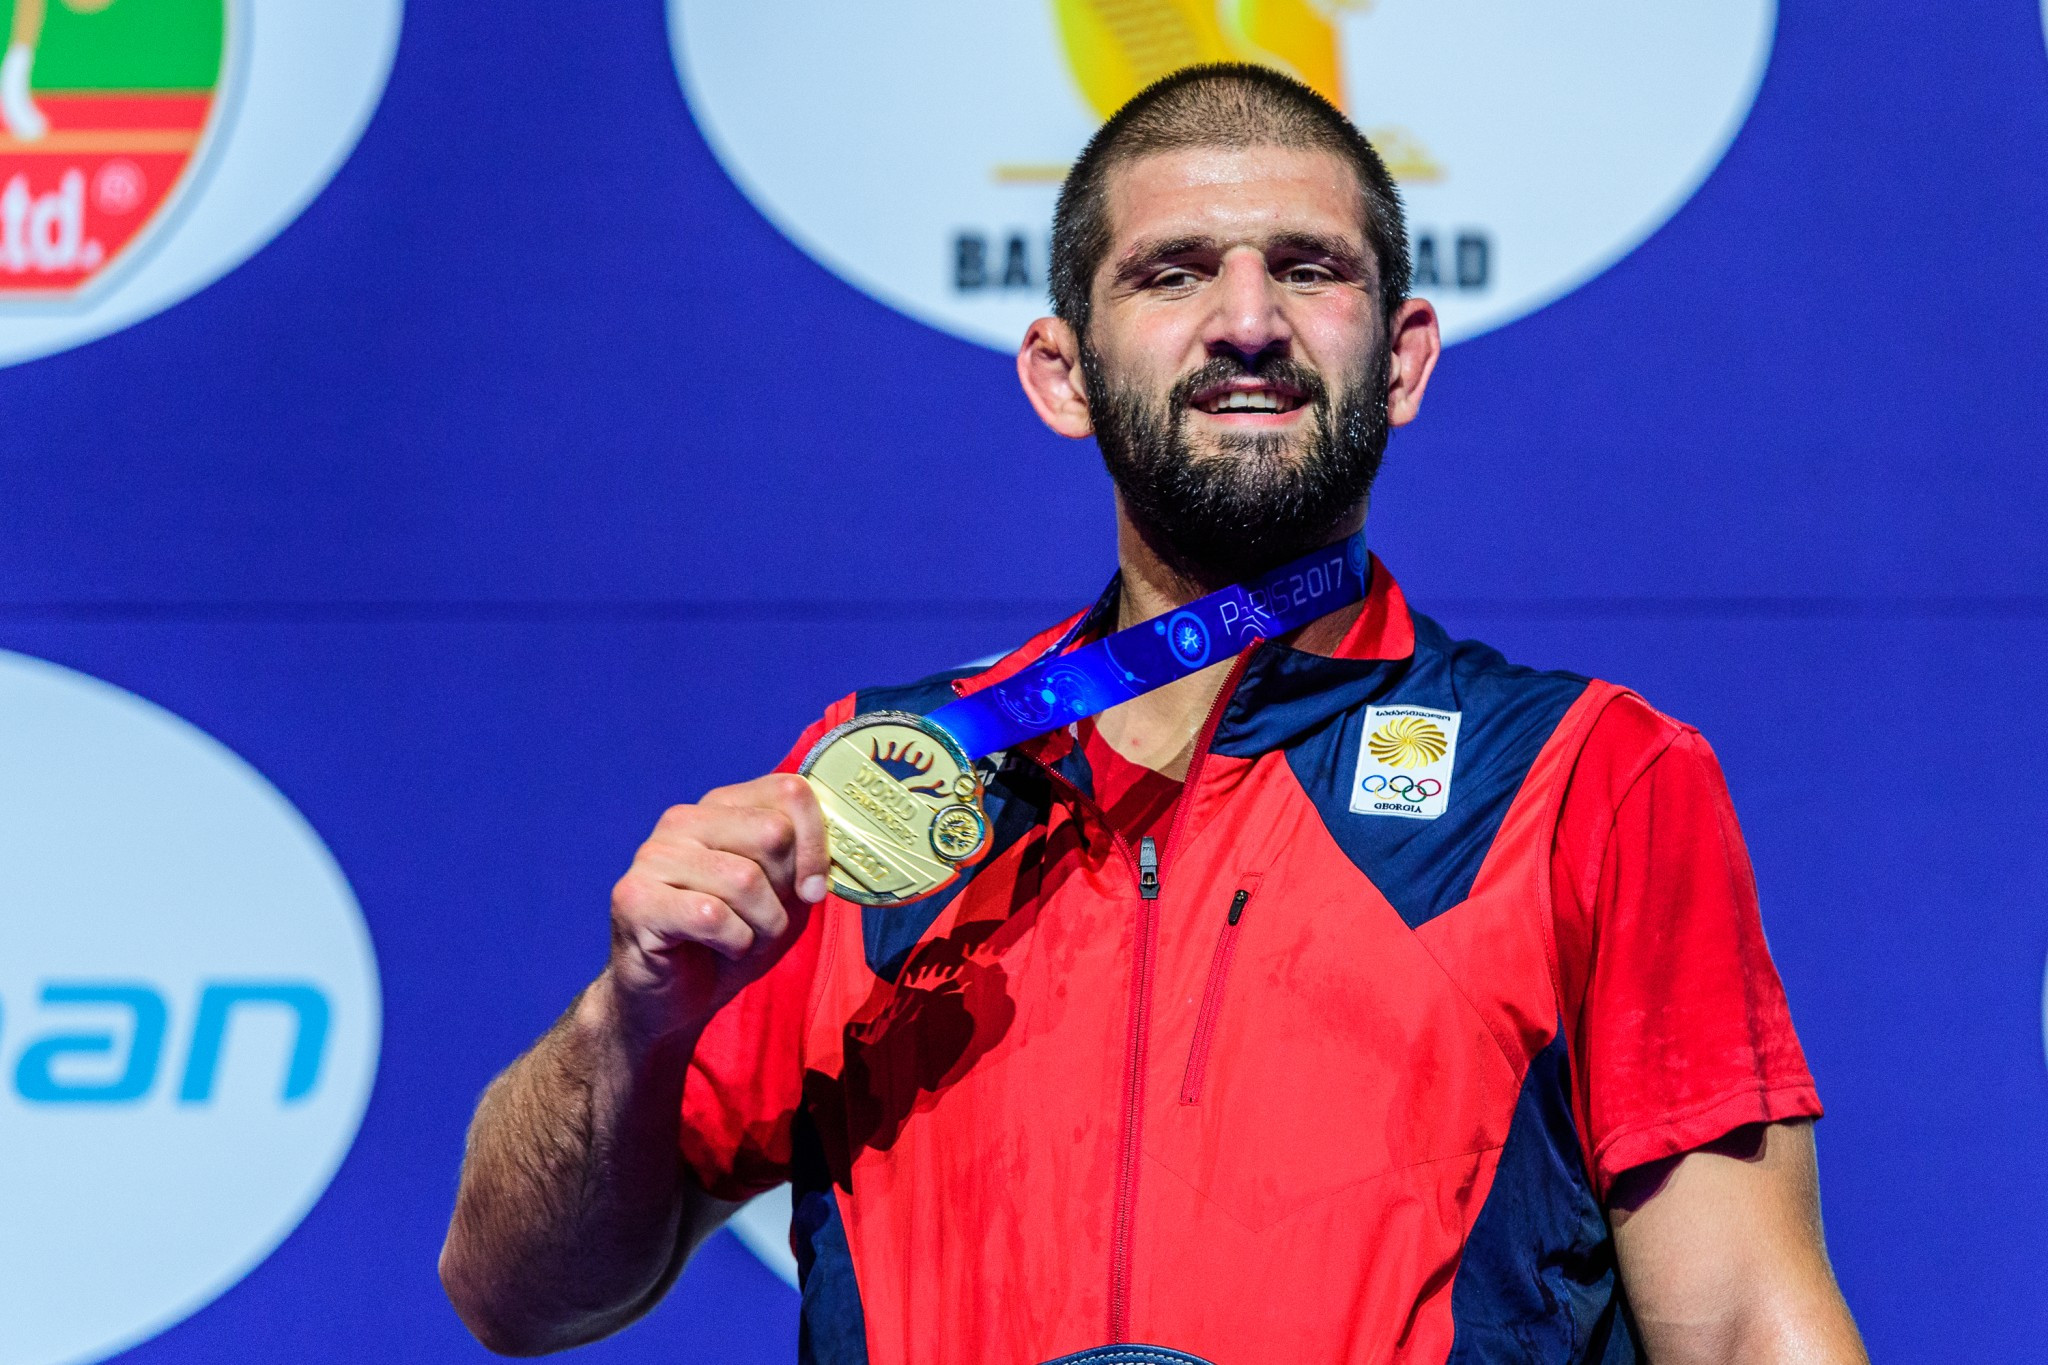 Olympic gold medallist stunned in thriller at UWW World Championships